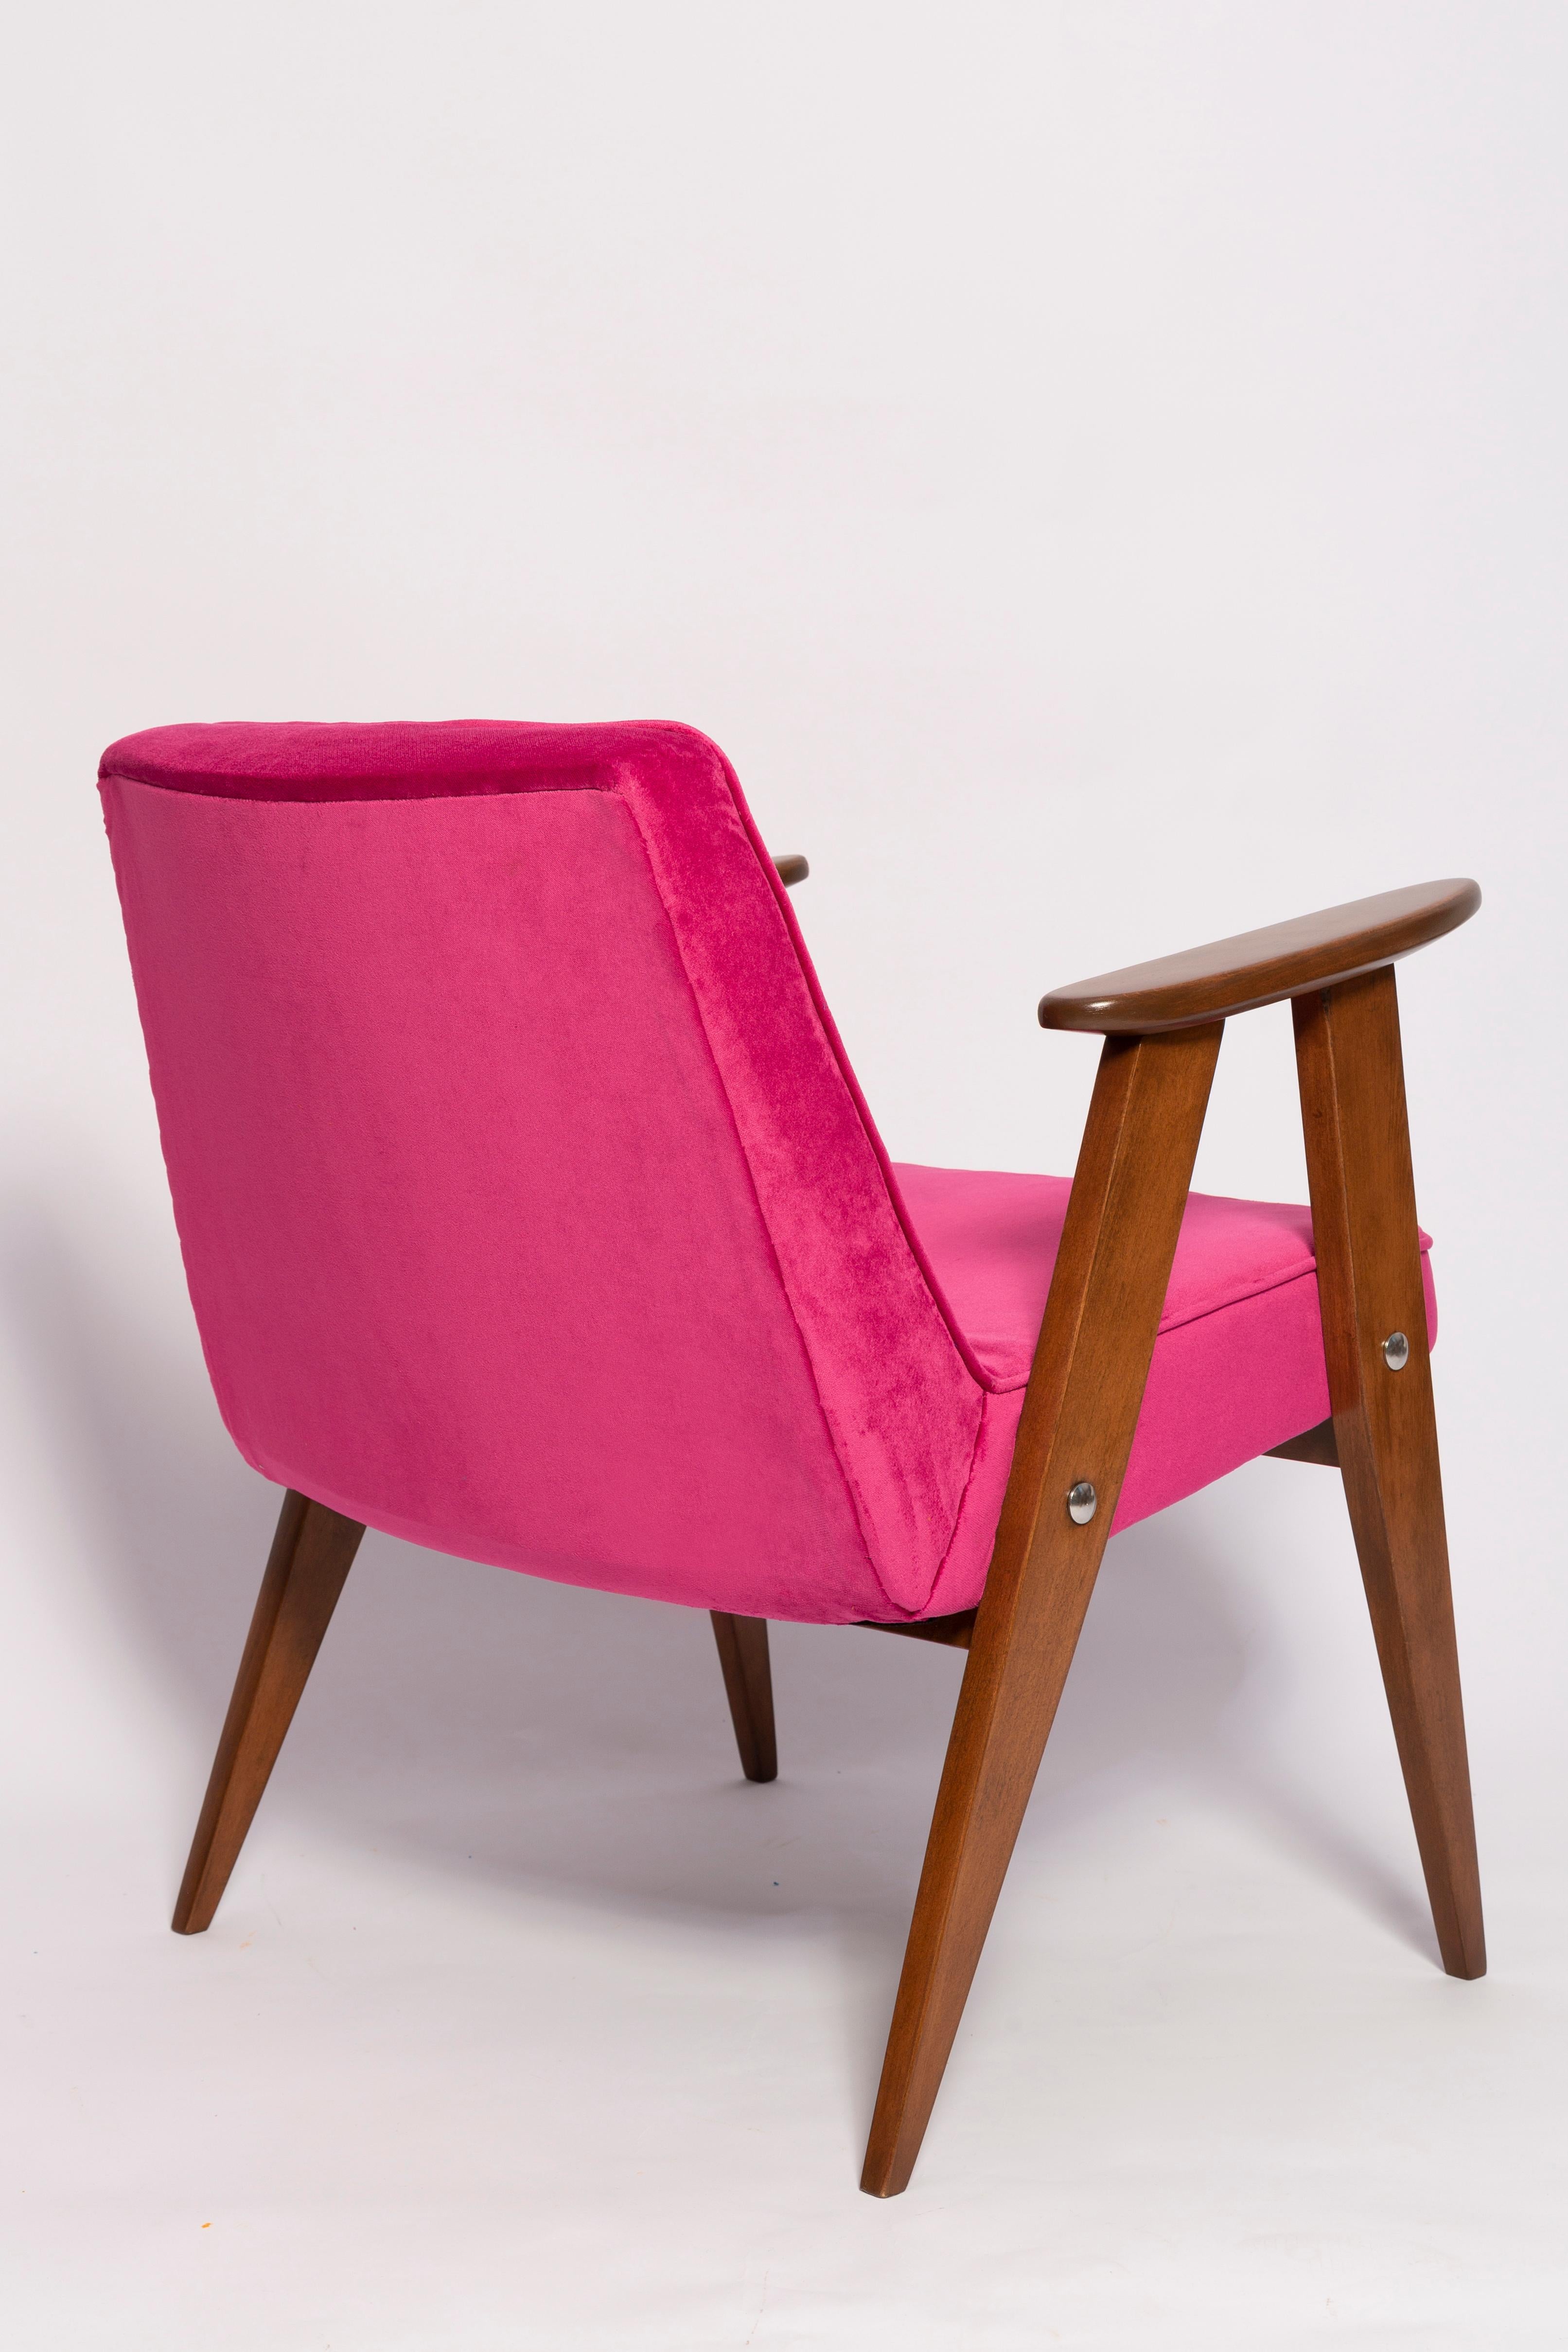 Pair of Mid-Century 366 Armchairs, Pink and Blue, by Chierowski Europe, 1960s For Sale 6